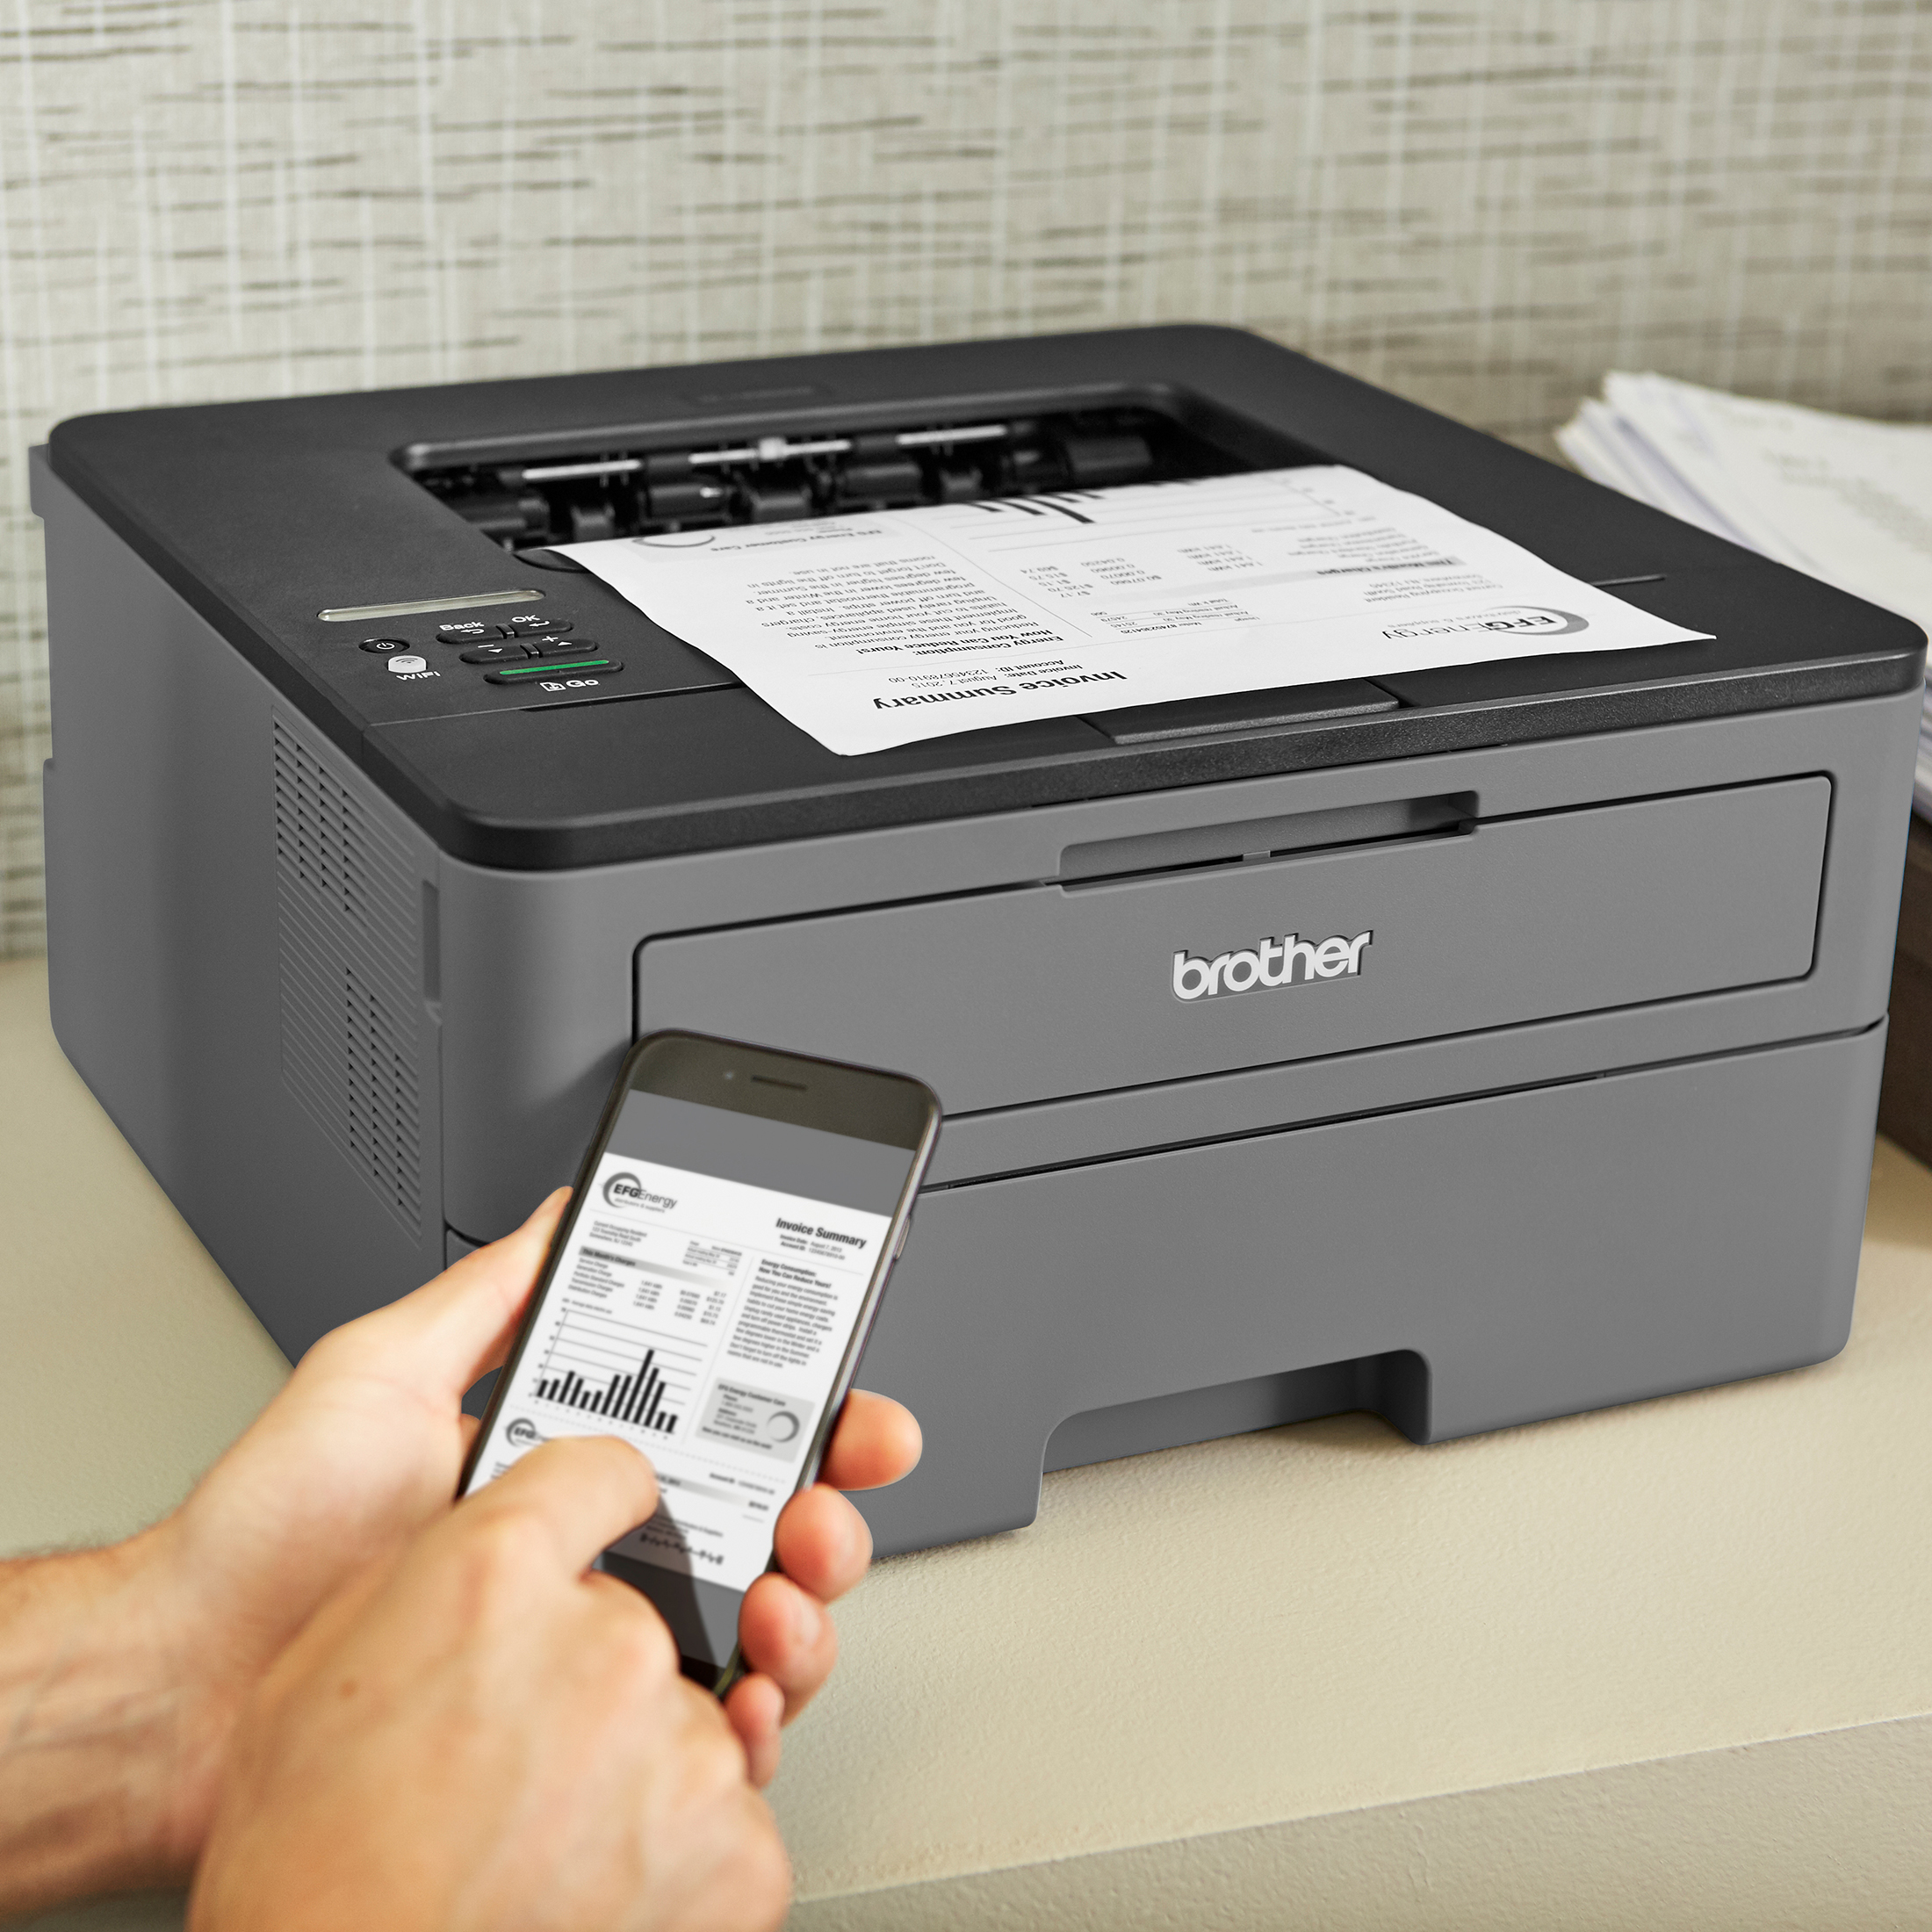 Brother HL-L2305W Compact Mono Laser Single Function Printer with Wireless and Mobile Device Printing¹, Restored - image 5 of 6